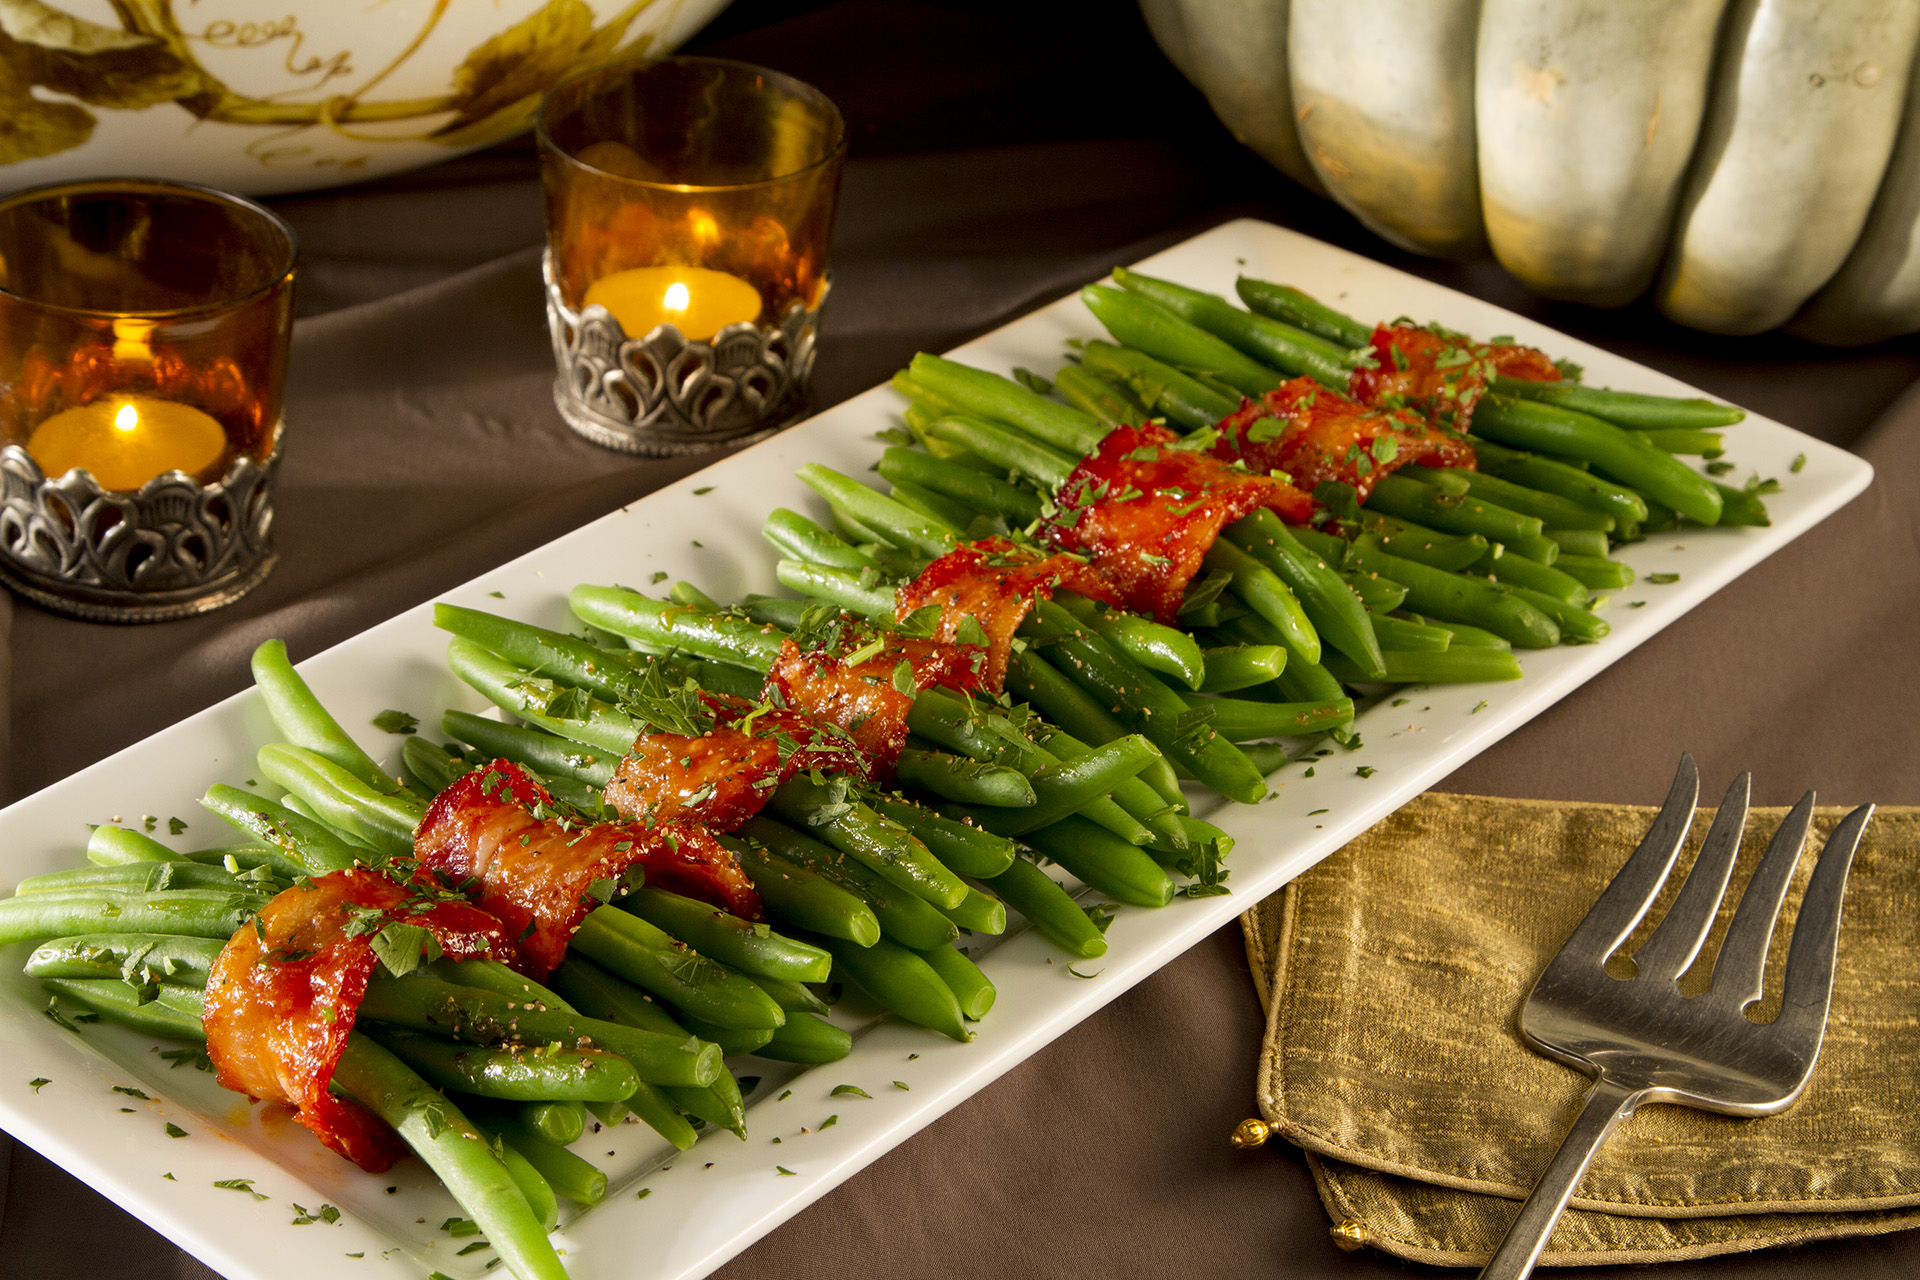 Add a little flair to your fresh green beans by wrapping them in a thick-cut bacon and pairing it with a zesty French dressing!